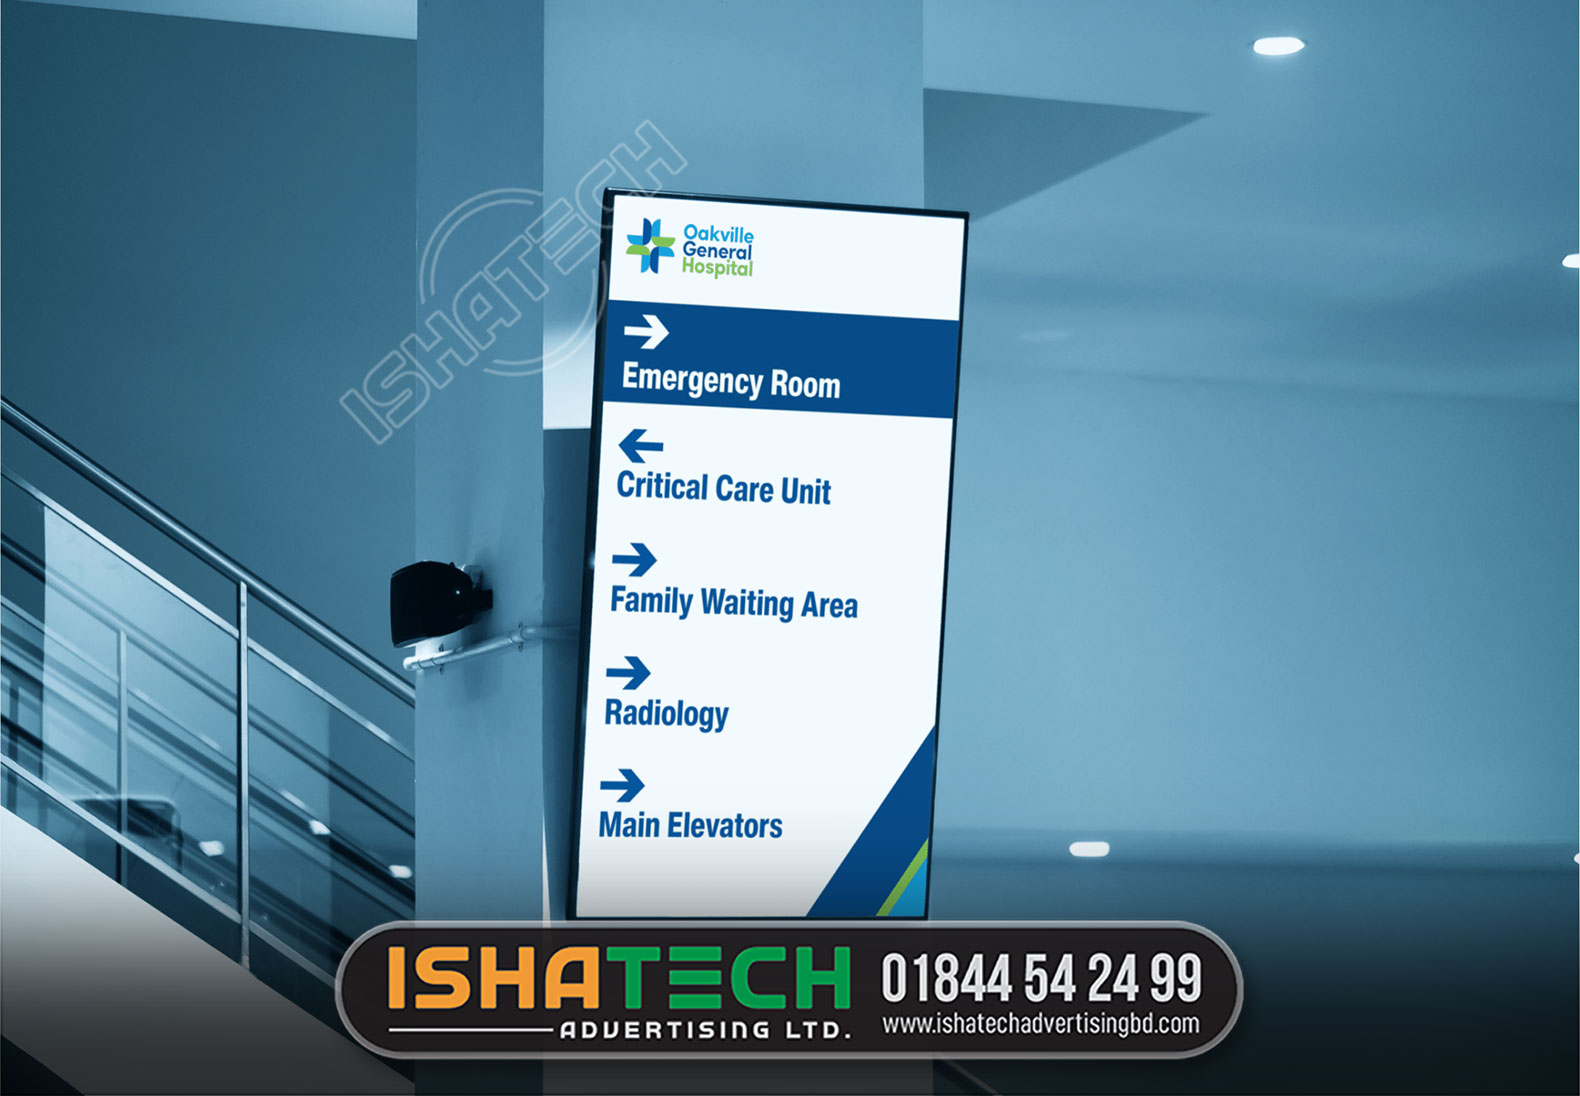 EMERGENCY ROOM NAME PALTE, CRITICAL CARE UNIT NAME PALTE, FAMILY WAITING AREA NAME PLATE, RADIOLOGY NAME PALTE SIGNS, MAIN ELEVATORS NAME PALTE MAKING SHOP OR COMPANY IN DHAKA BANGLADESH